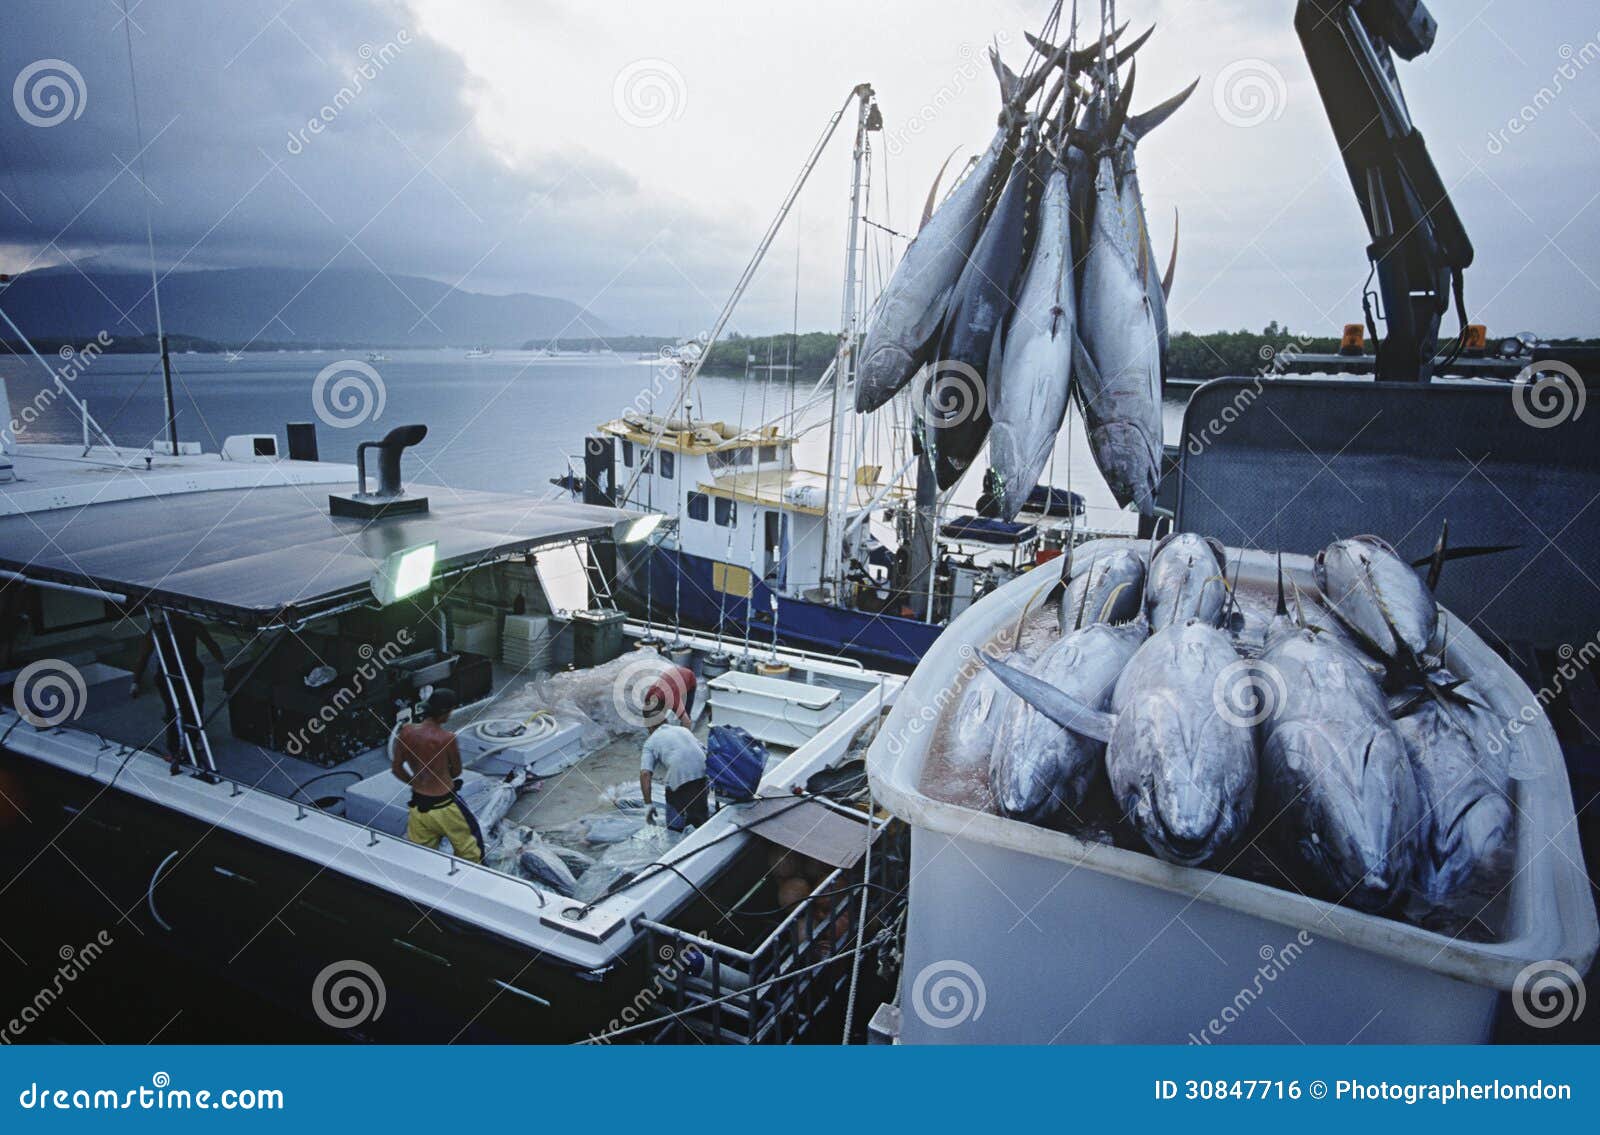 Tuna Fish In Container On Fishing Boat Dawn Cairns ...